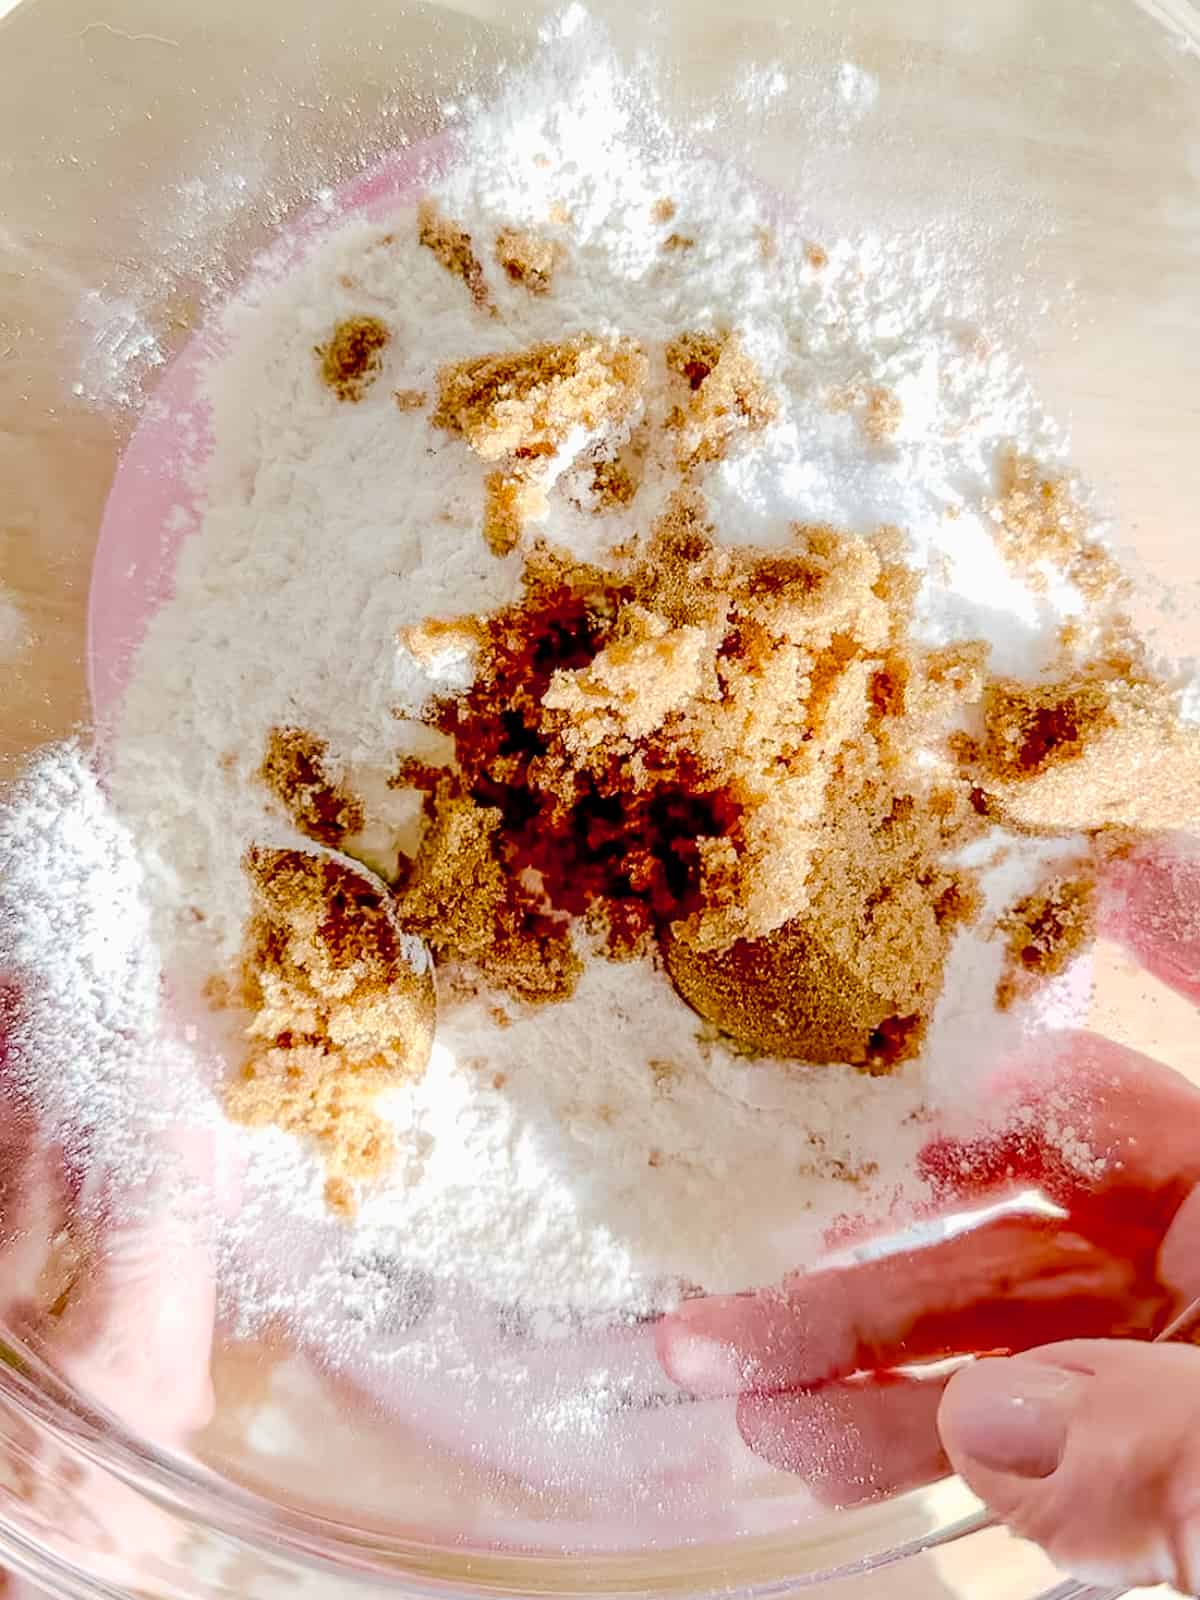 Mixing biscuit dry ingredients in a bowl.